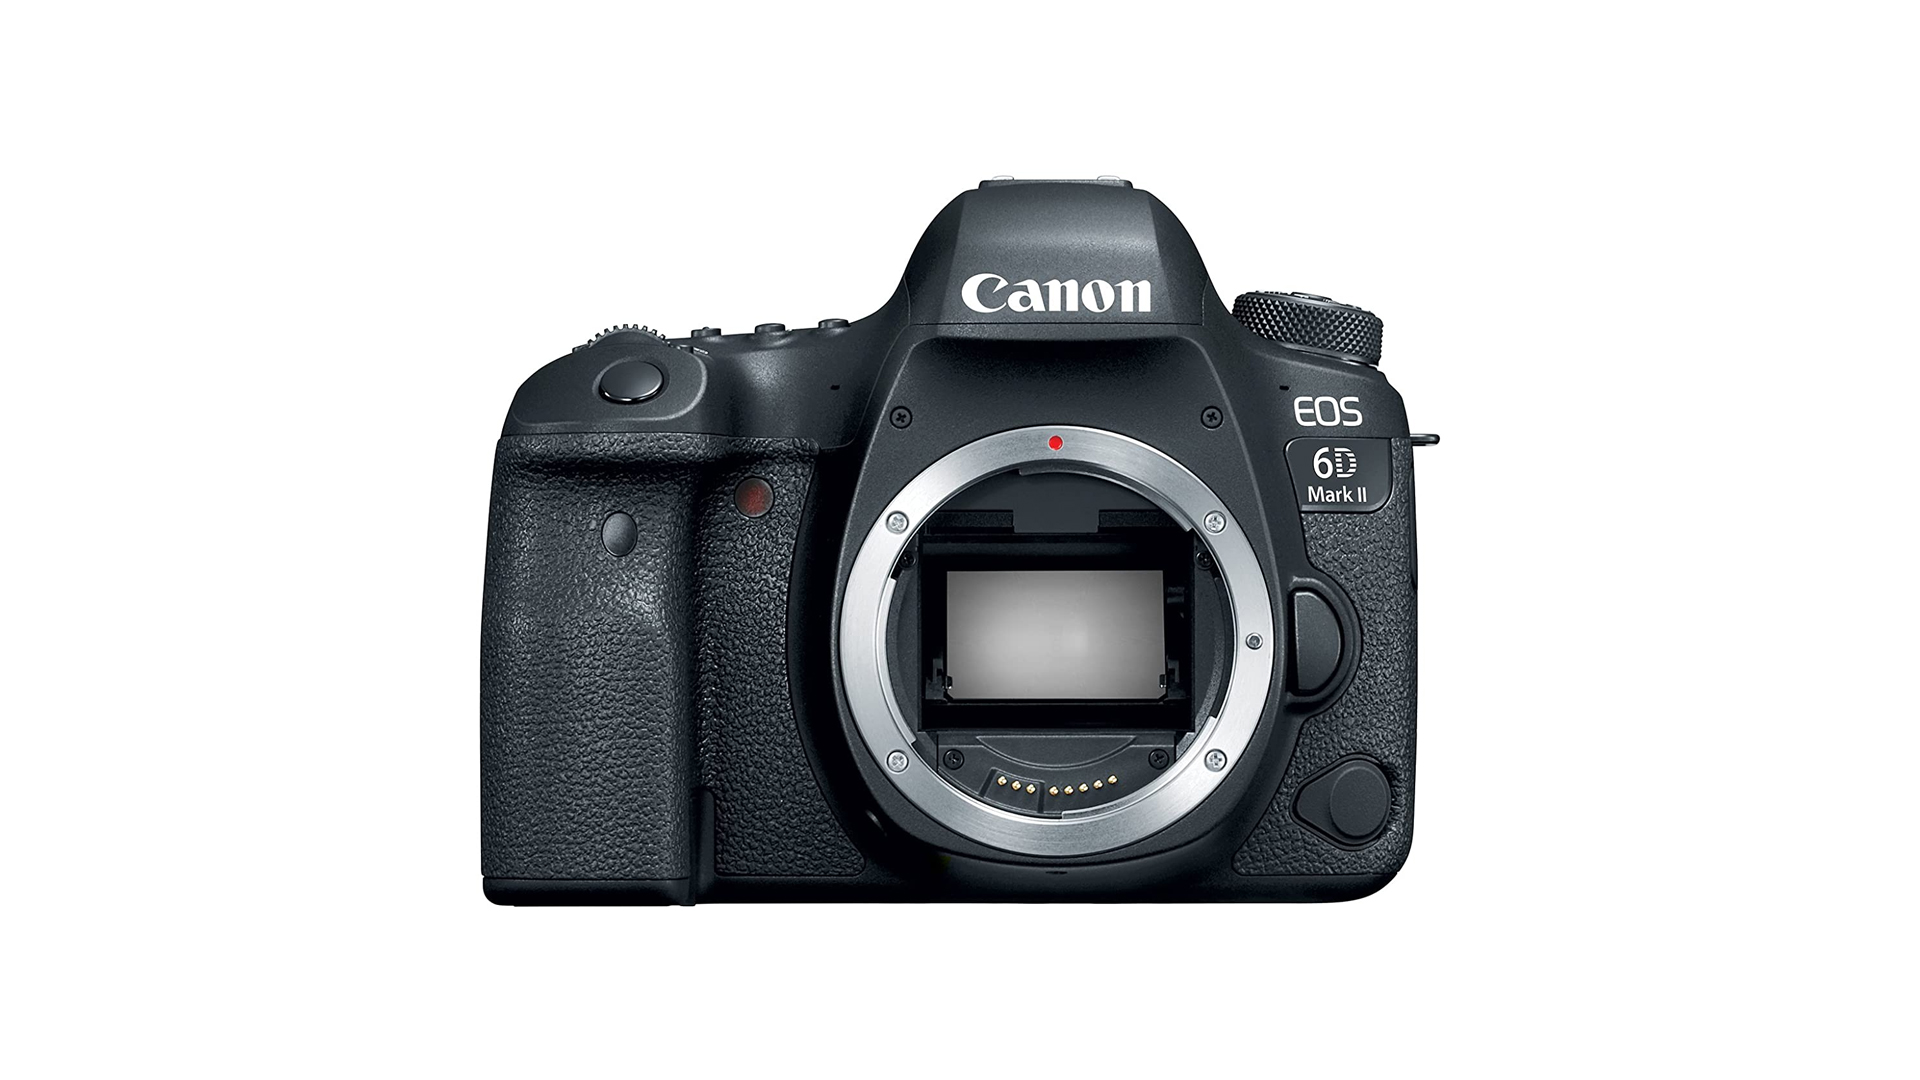 Cheaper than Amazon Prime Day: Save over $600 on the Canon EOS 6D Mark II at Walmart